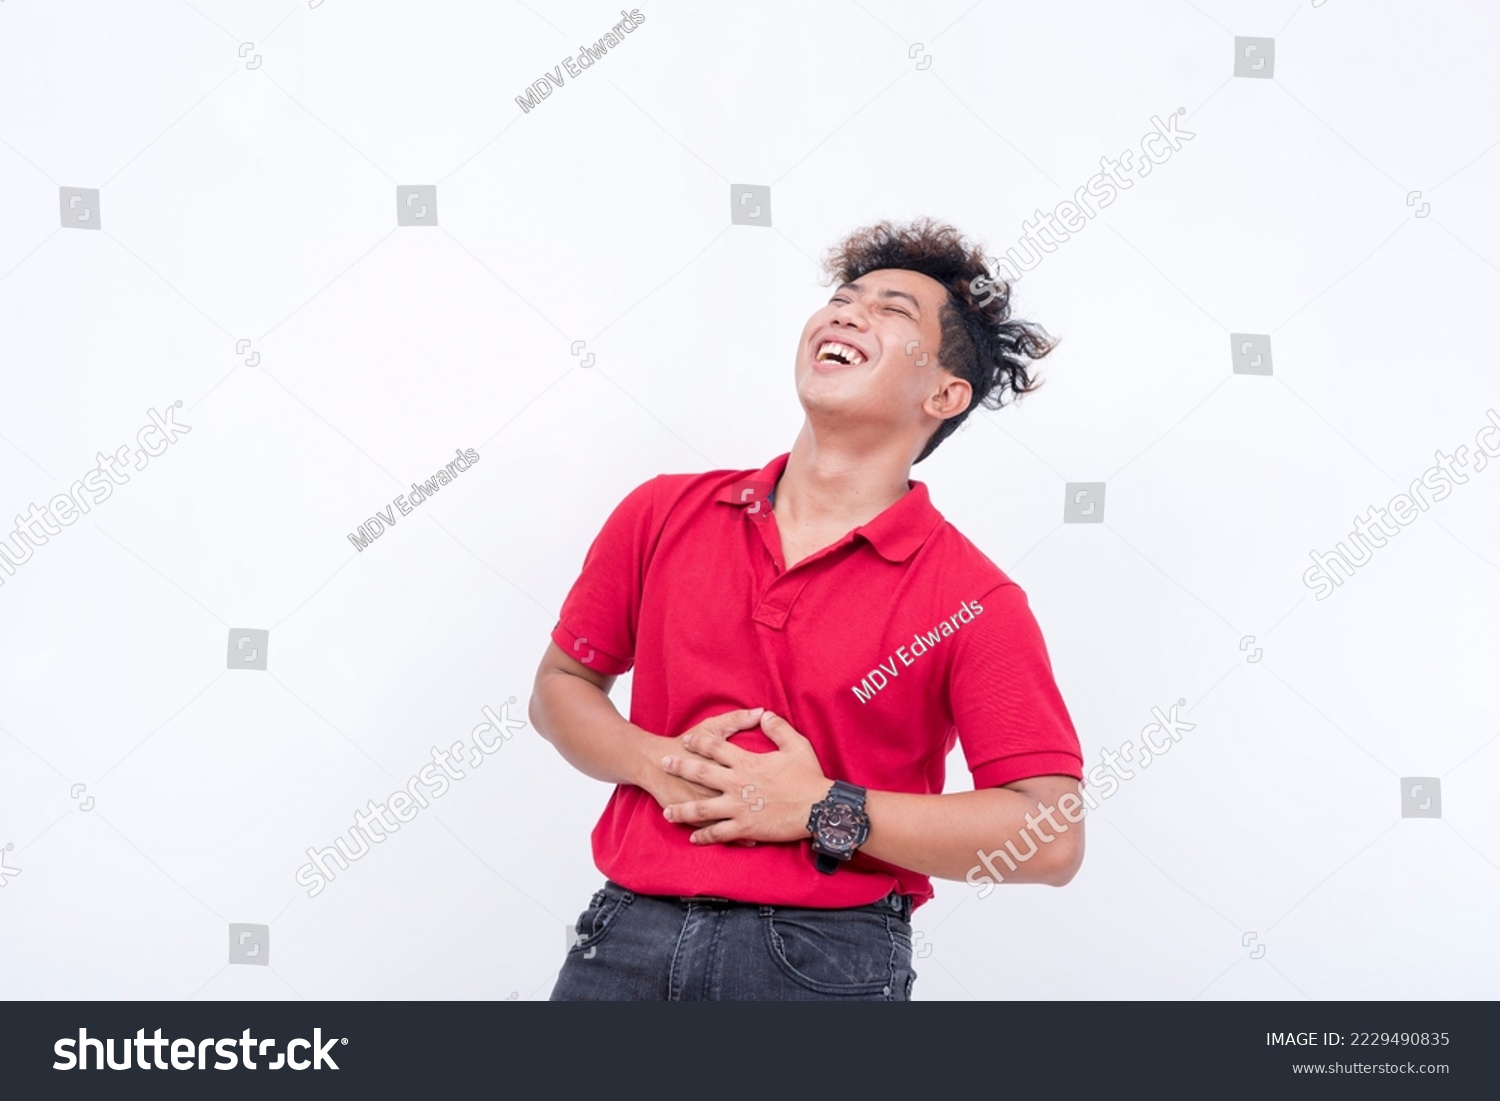 A man laughing intensely. A asian person having fun. Lighthearted scene isolated on a white background. #2229490835